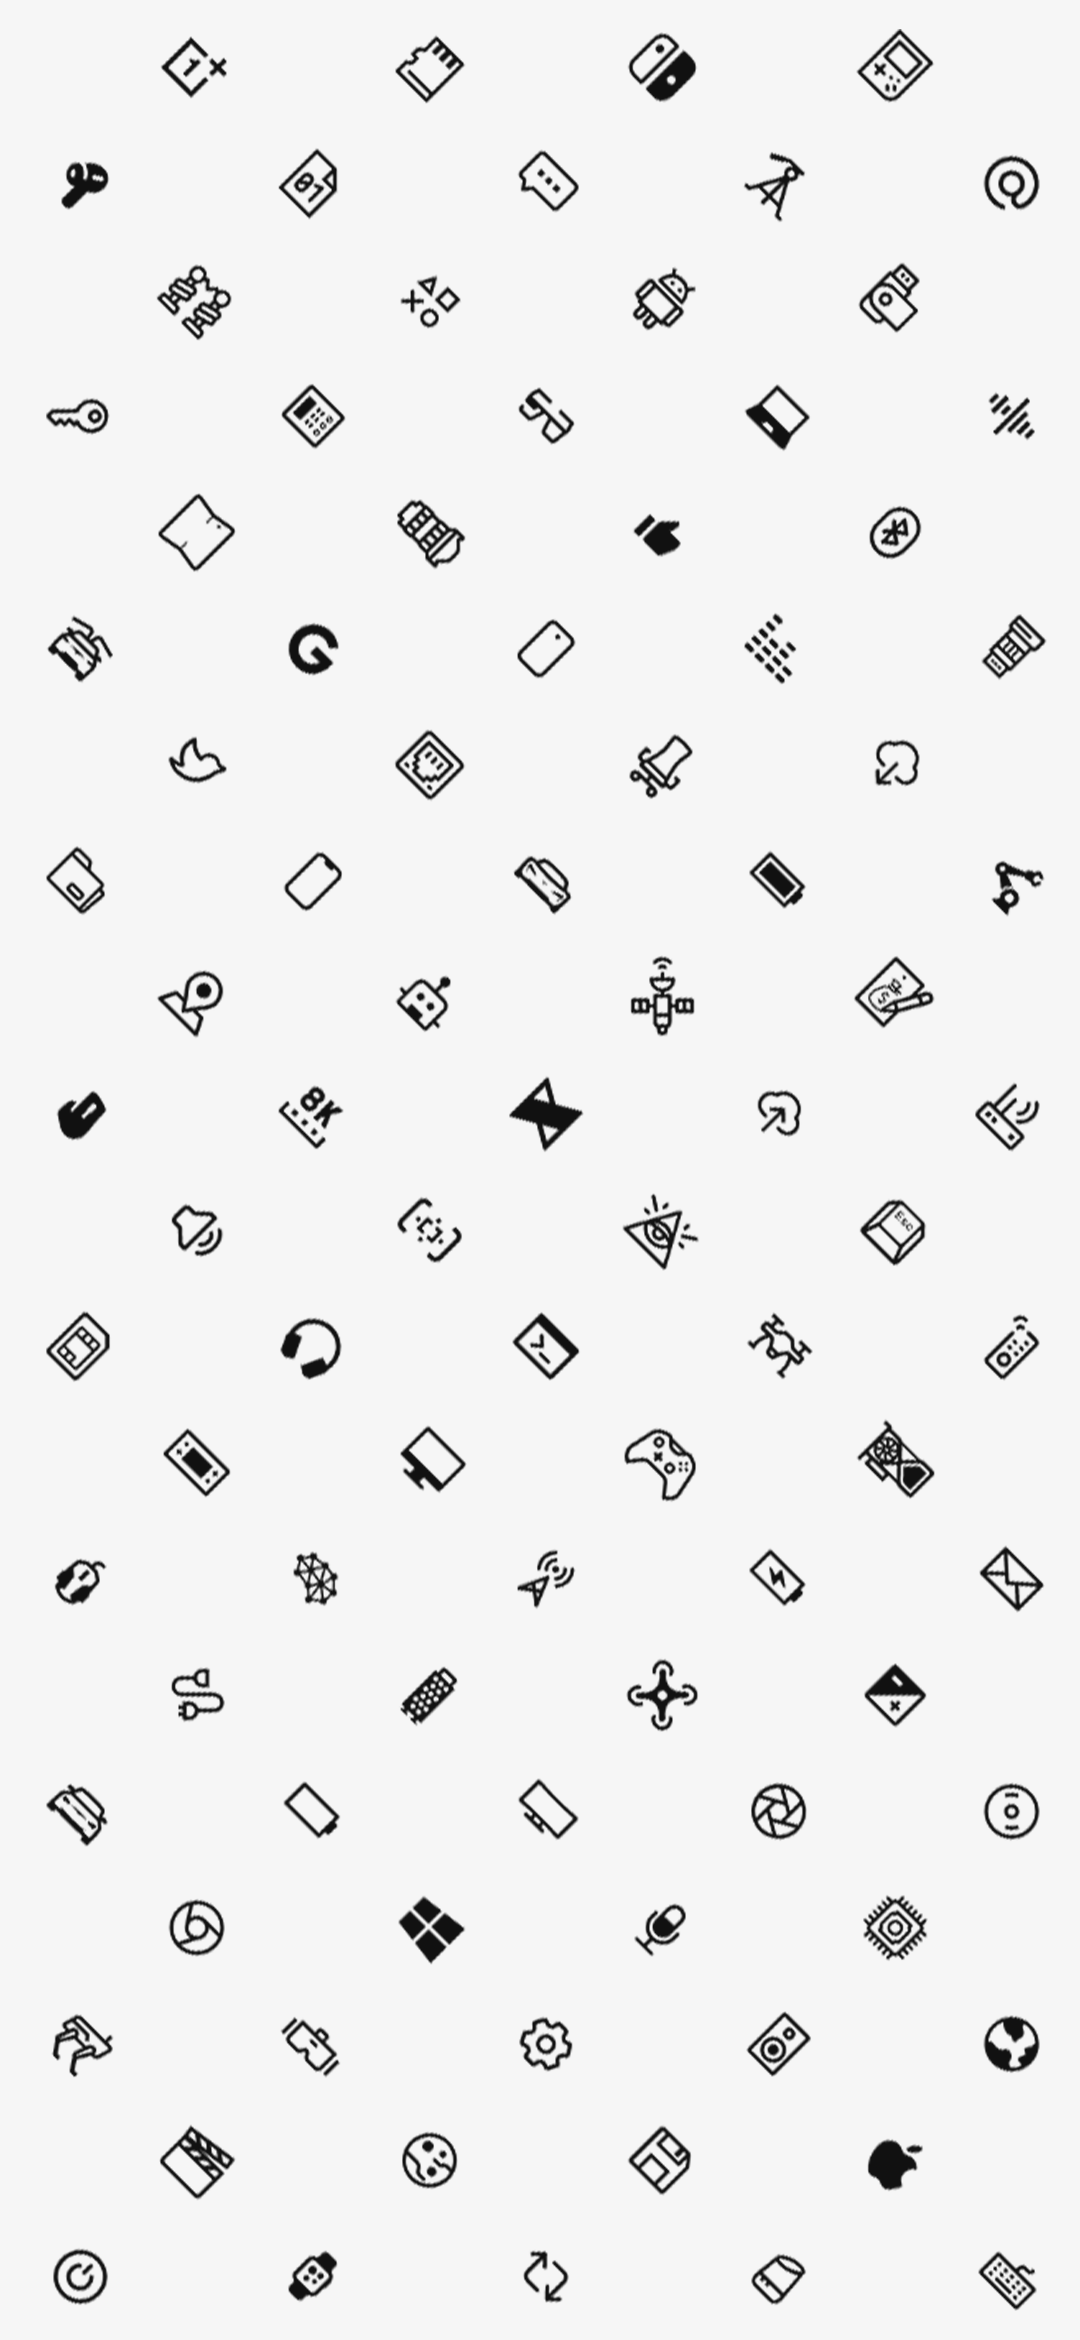 ICONS >> The MKBHD Collection dbrand Wallpaper Free Direct Download Drive Link